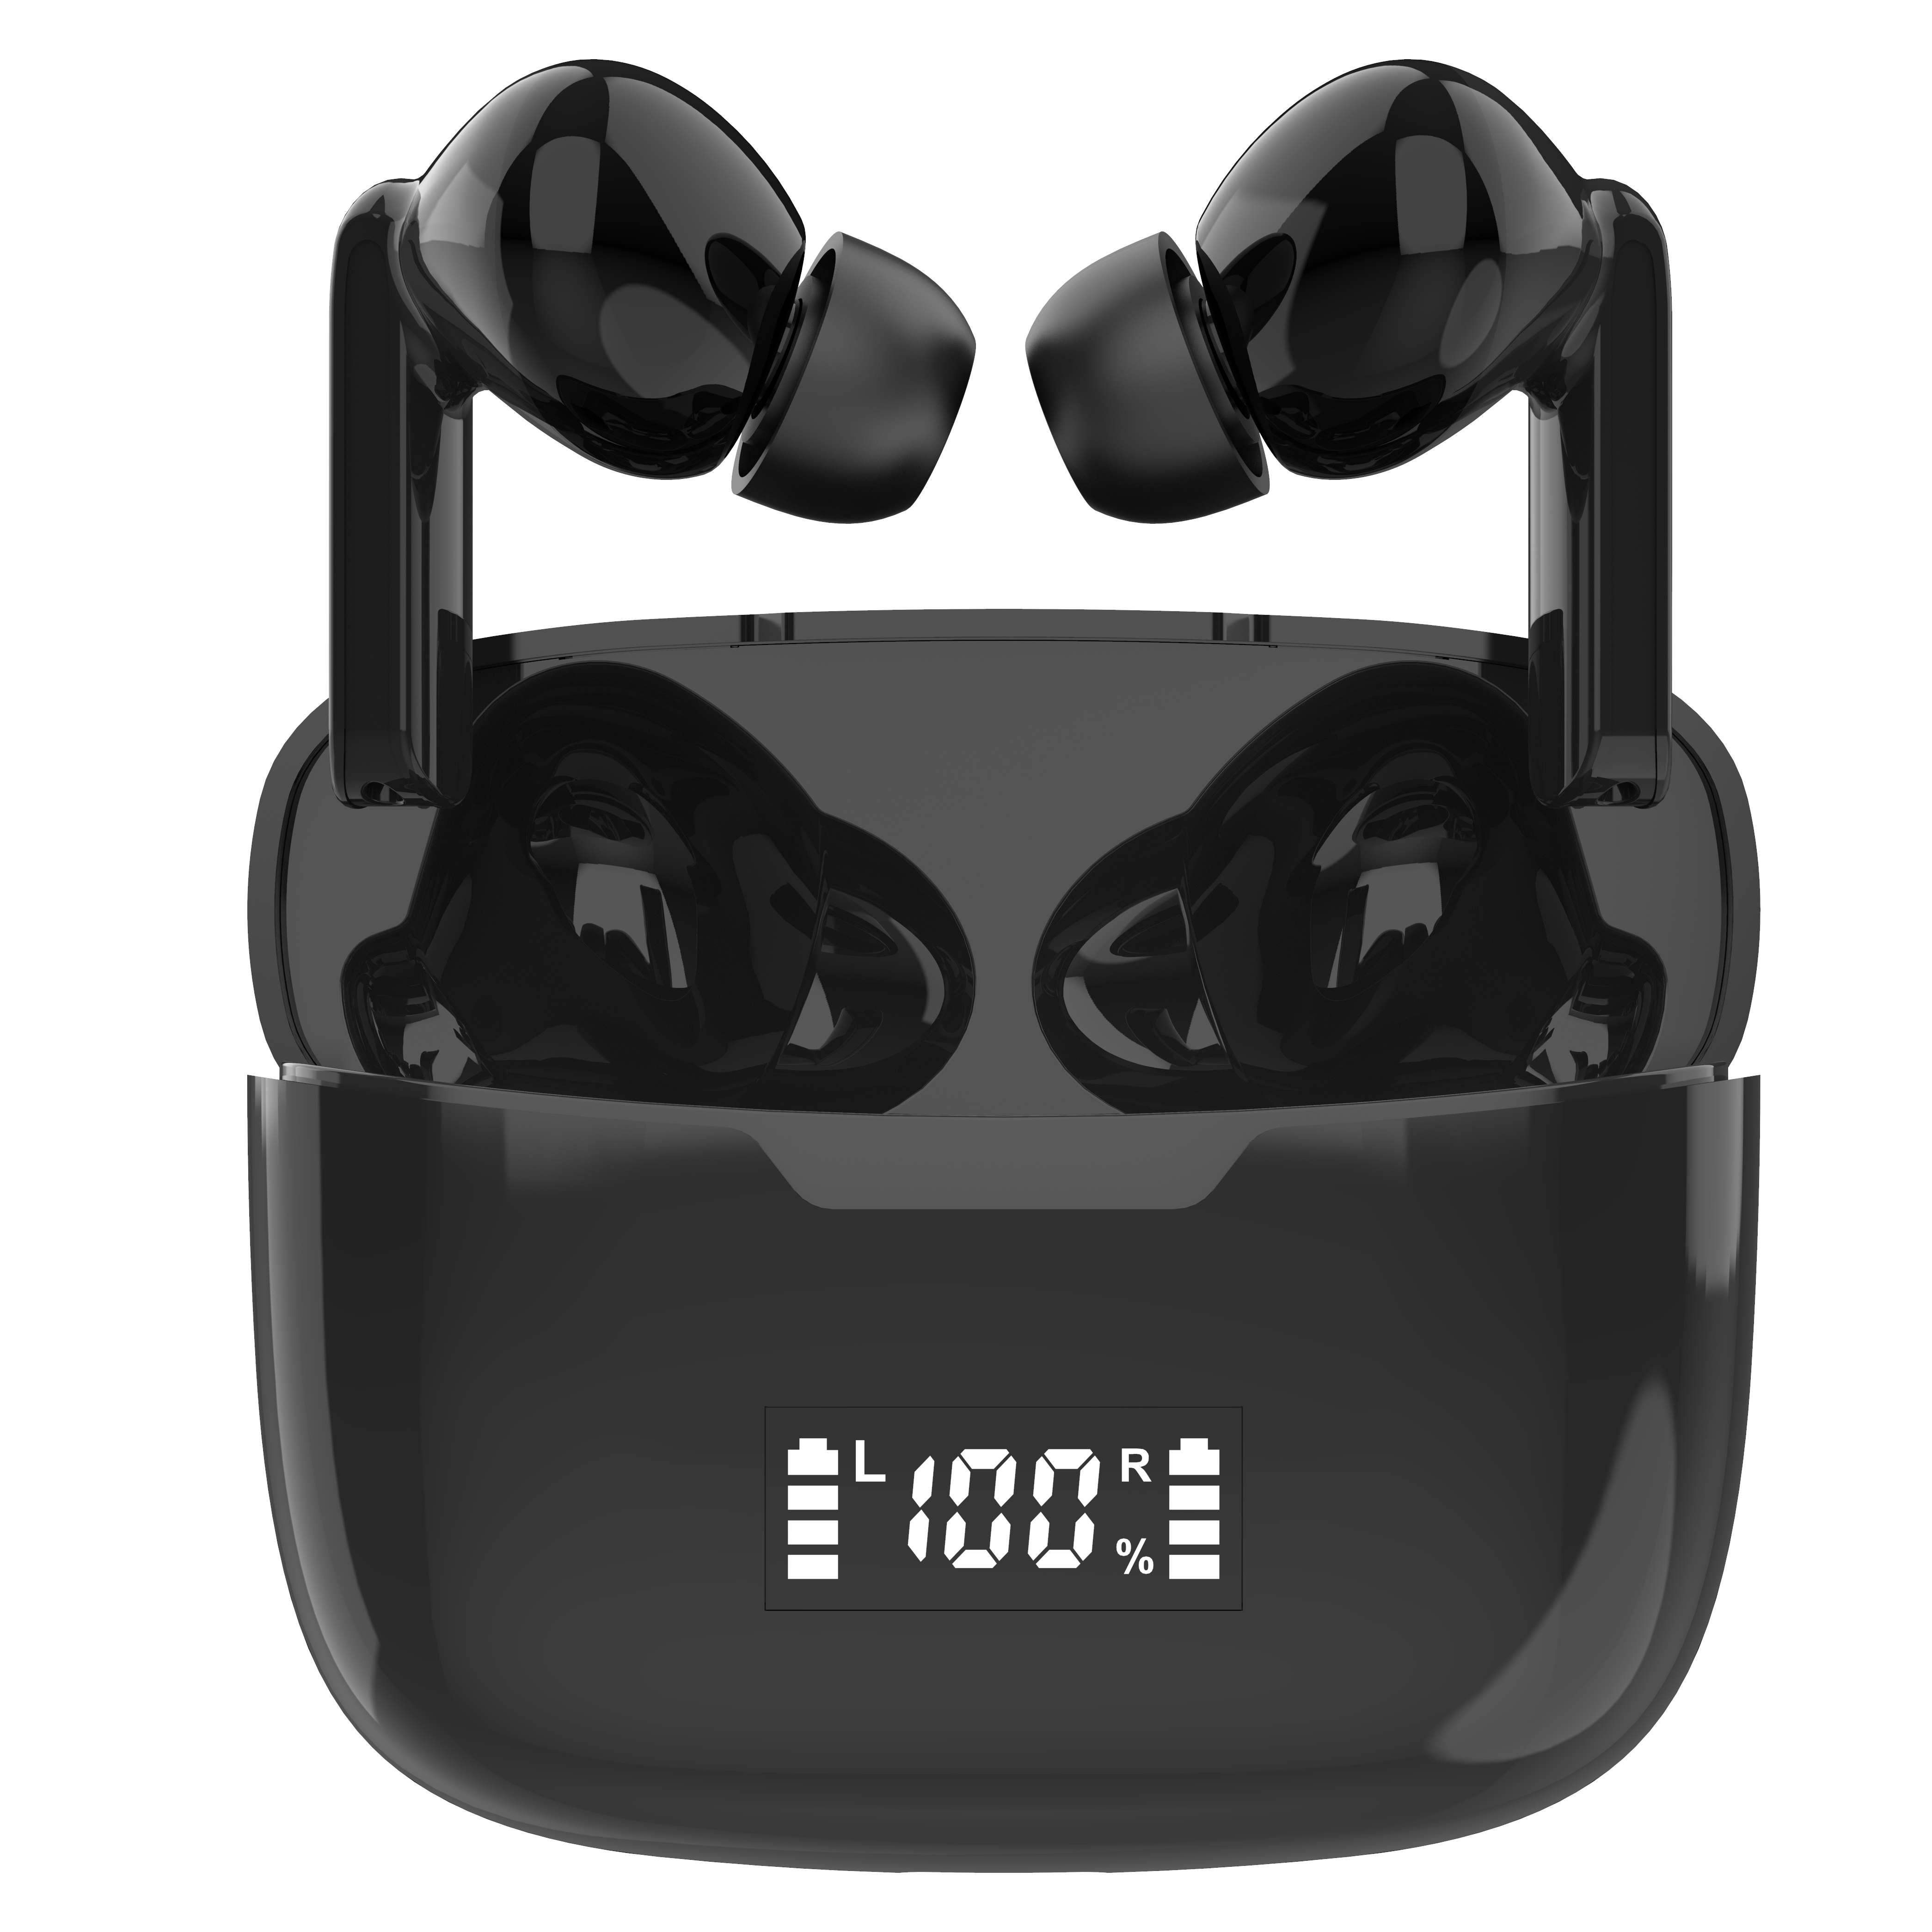 China OEM Ps4 Headset With Mic Wired - TWS Bluetooth Stereo Earbuds In Portable Design | Wellyp – Wellyp detail pictures